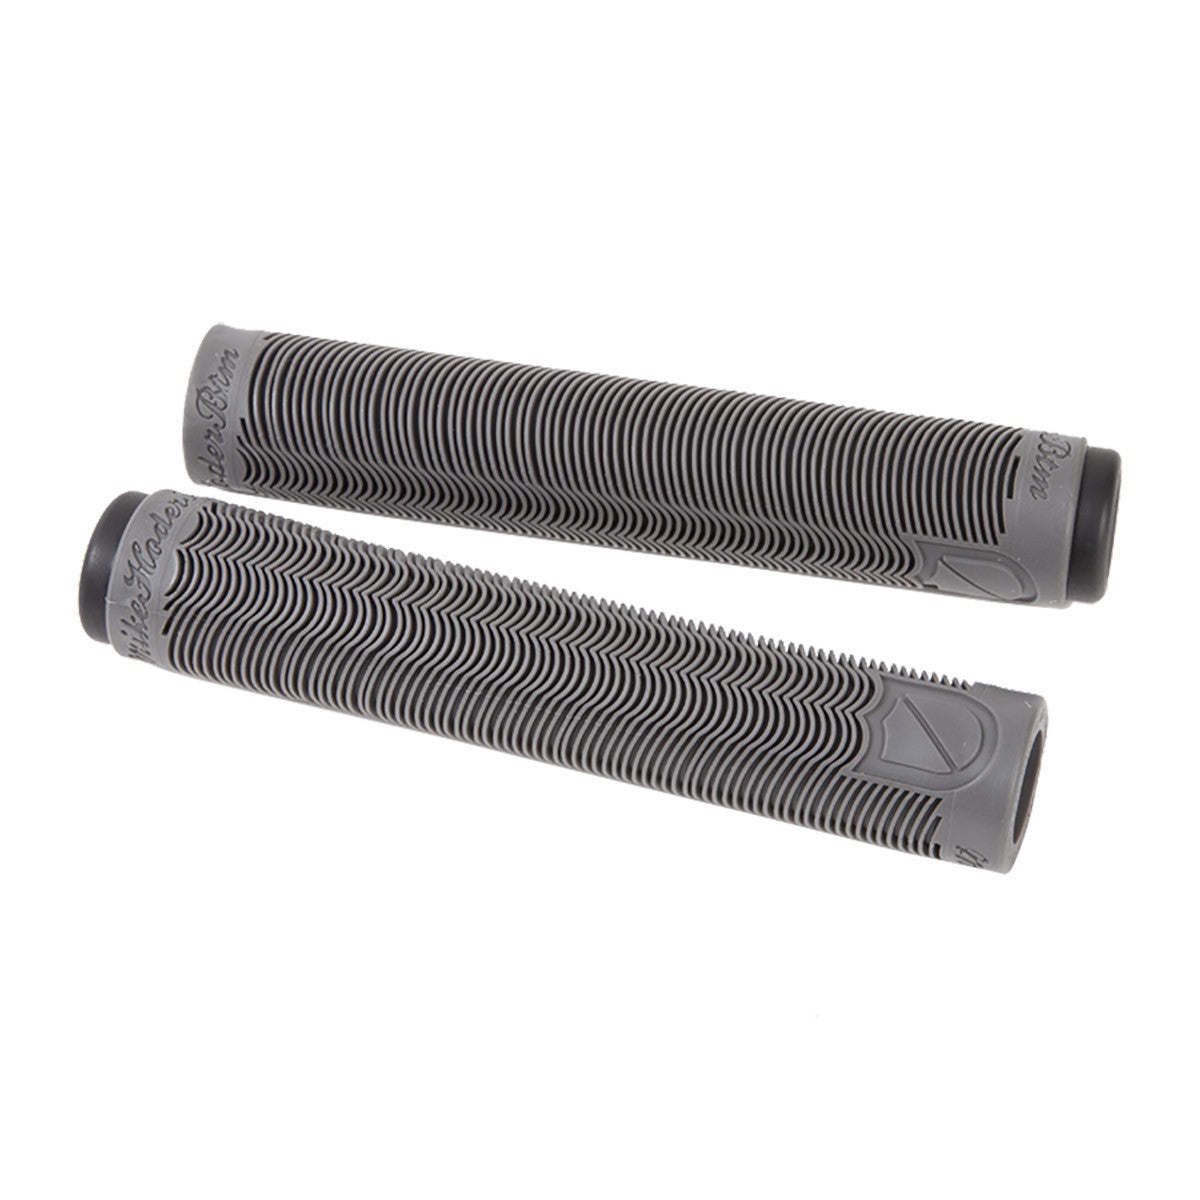 S&M Hoder Grips (Various Colors) - Downtown Bicycle Works 